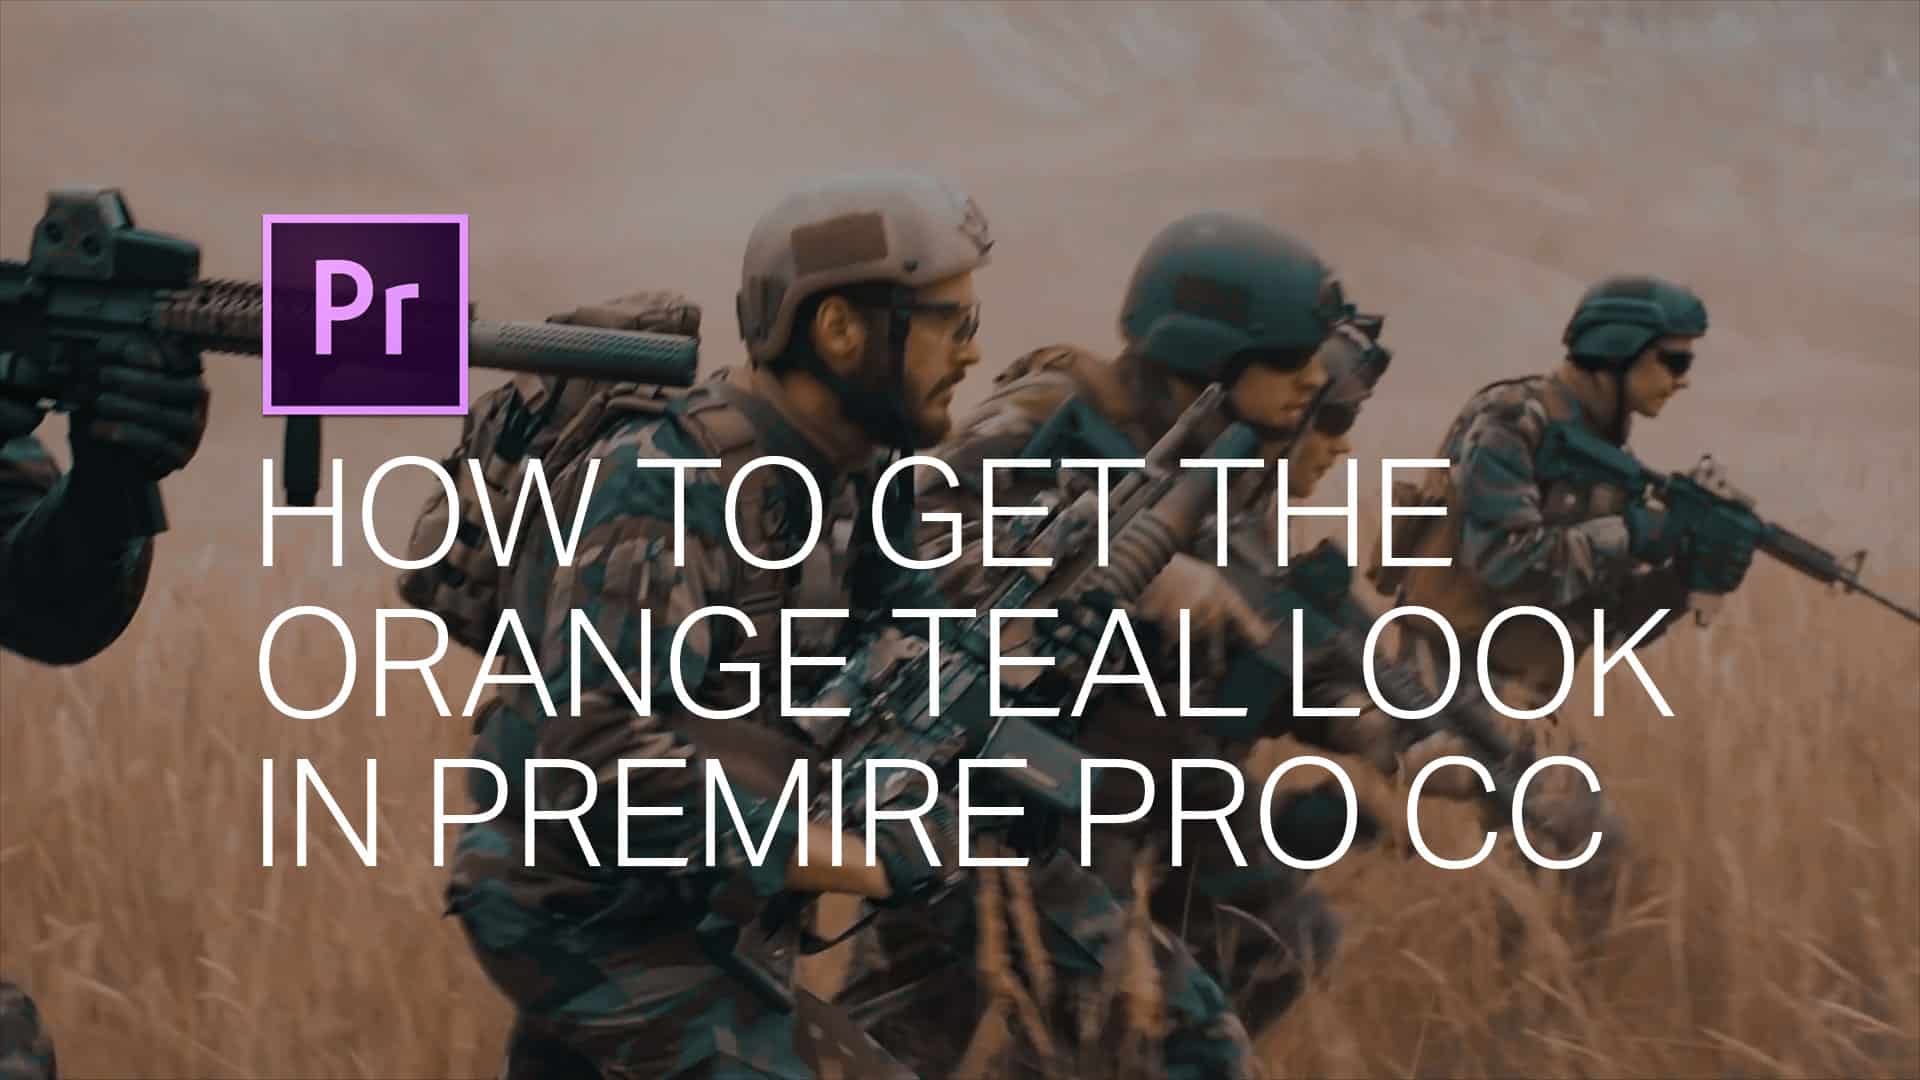 How to Achieve the Orange and Teal Look in Premiere Pro